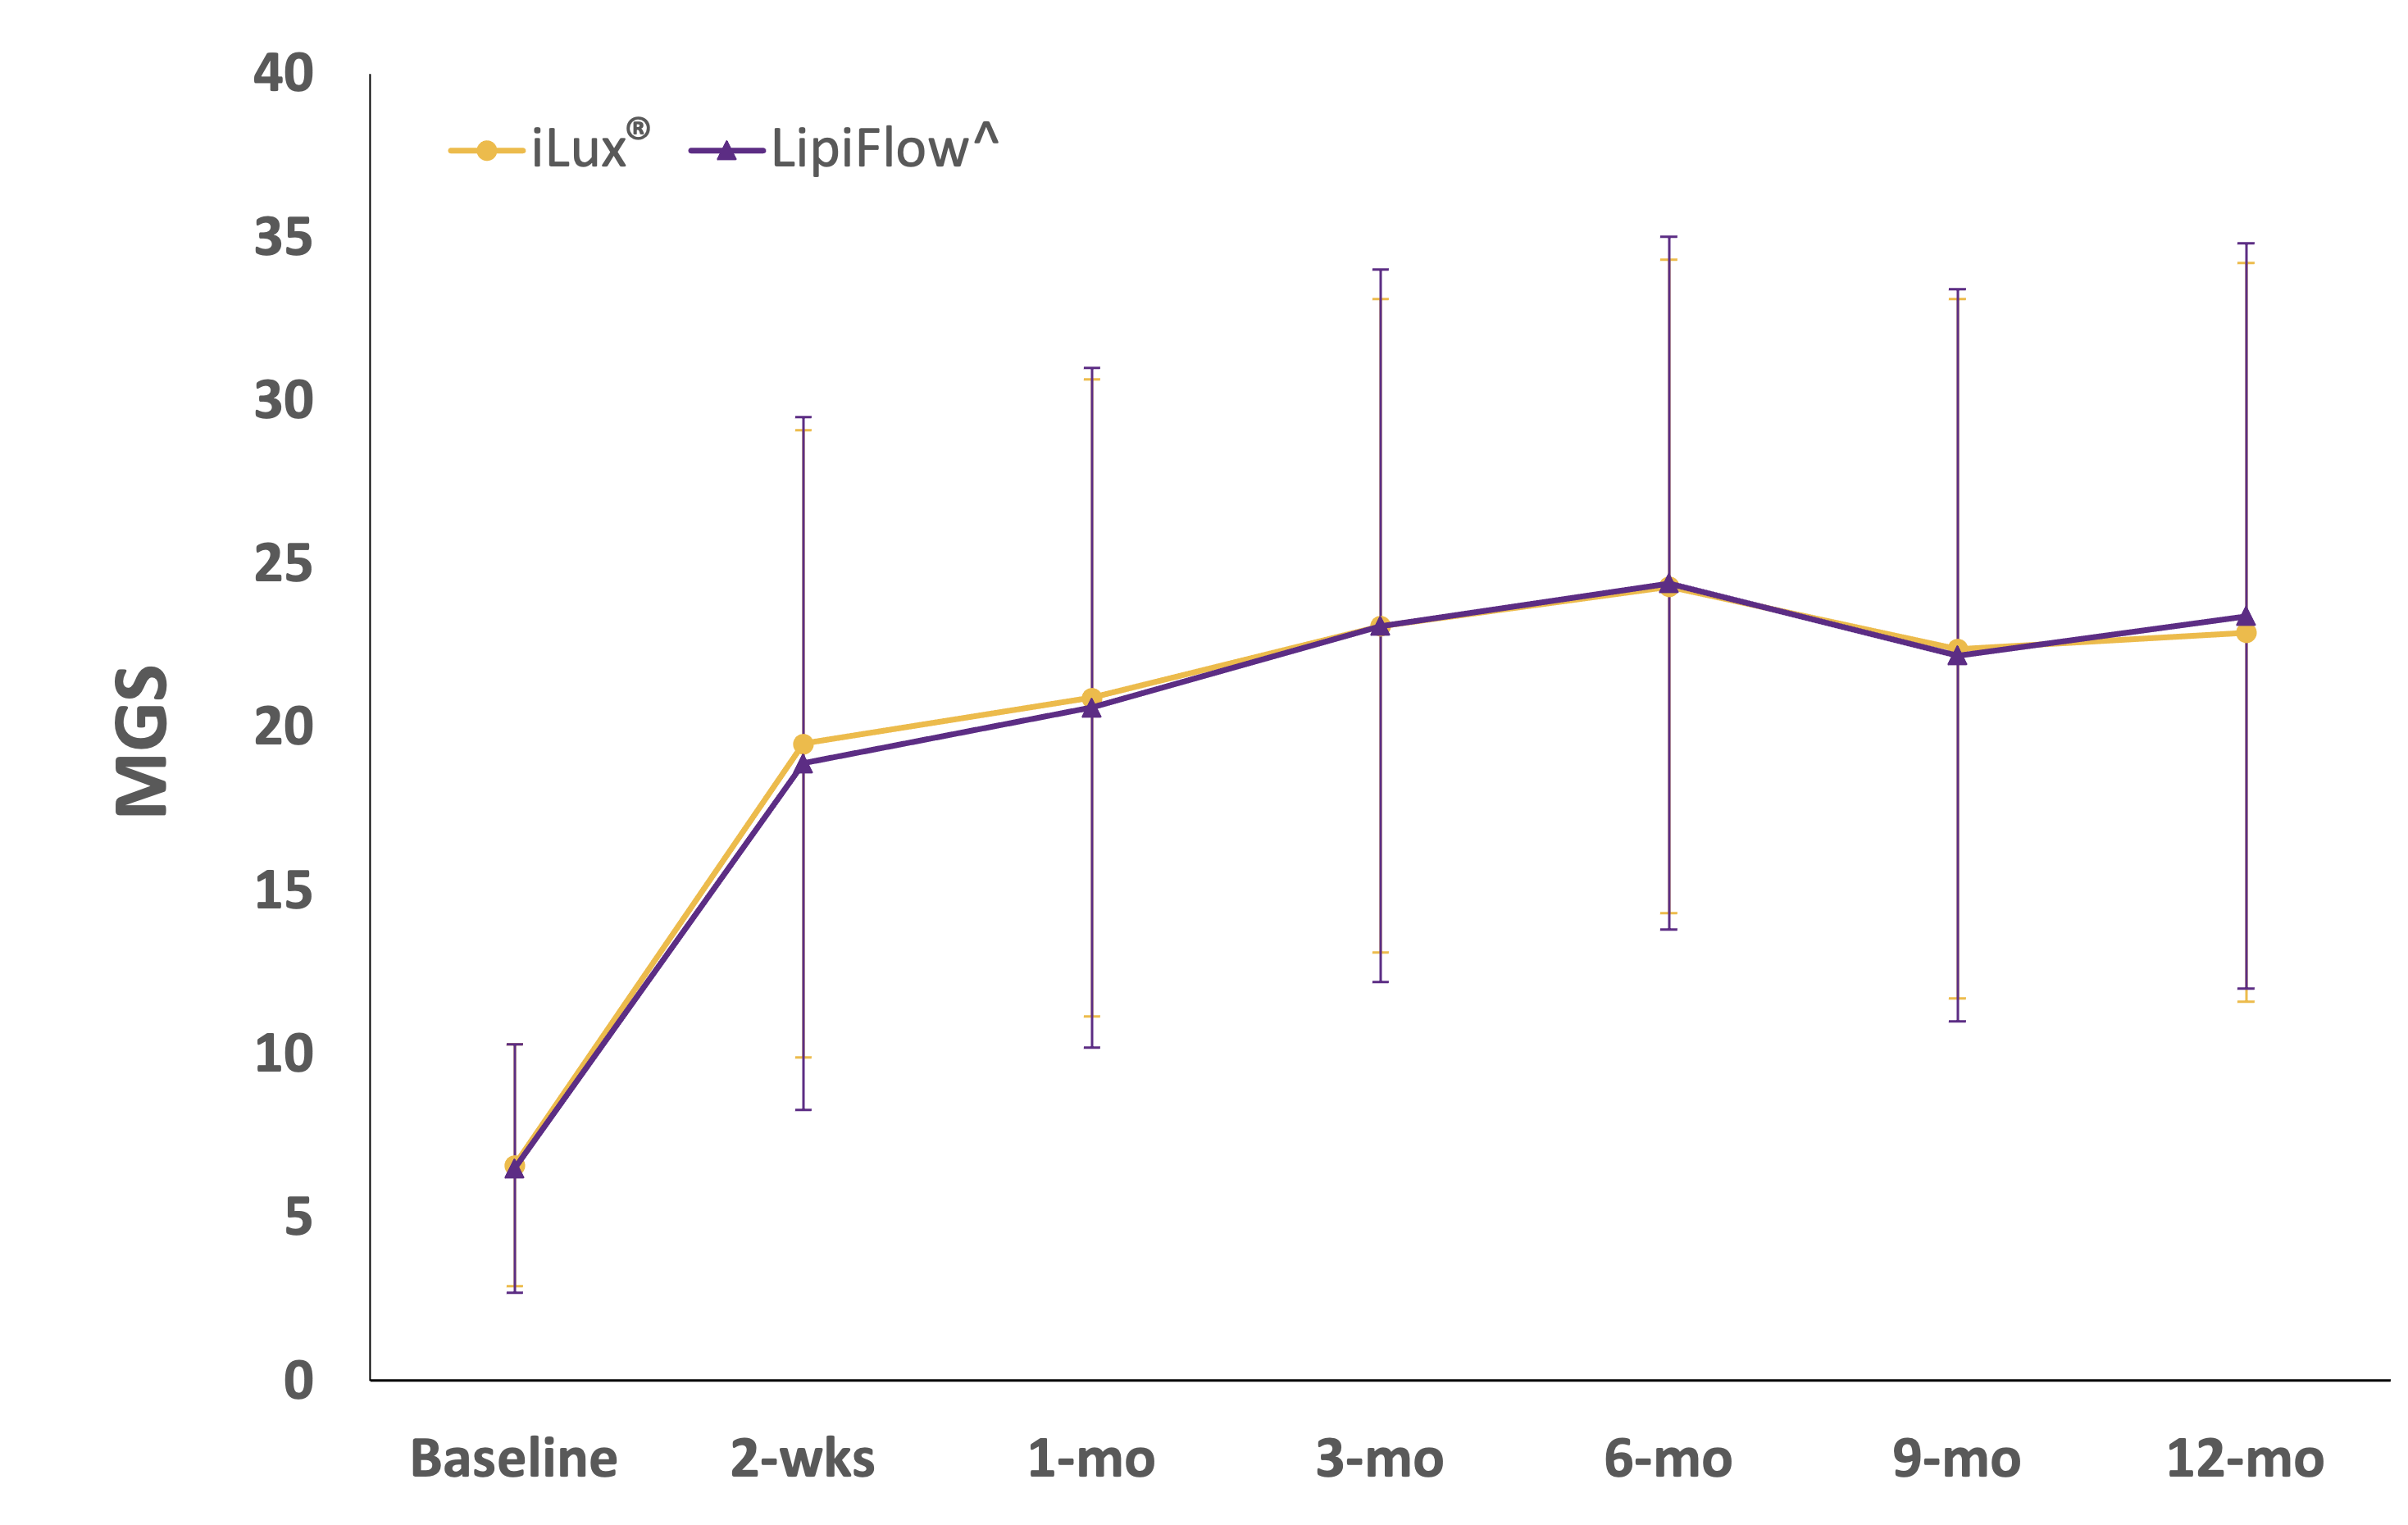 Graph showing Systane iLux was demonstrated to be non-inferior to Lipiflow^ for meibomian gland function through 12 months (at all measurements, including 1, 3, 6, 9 months)